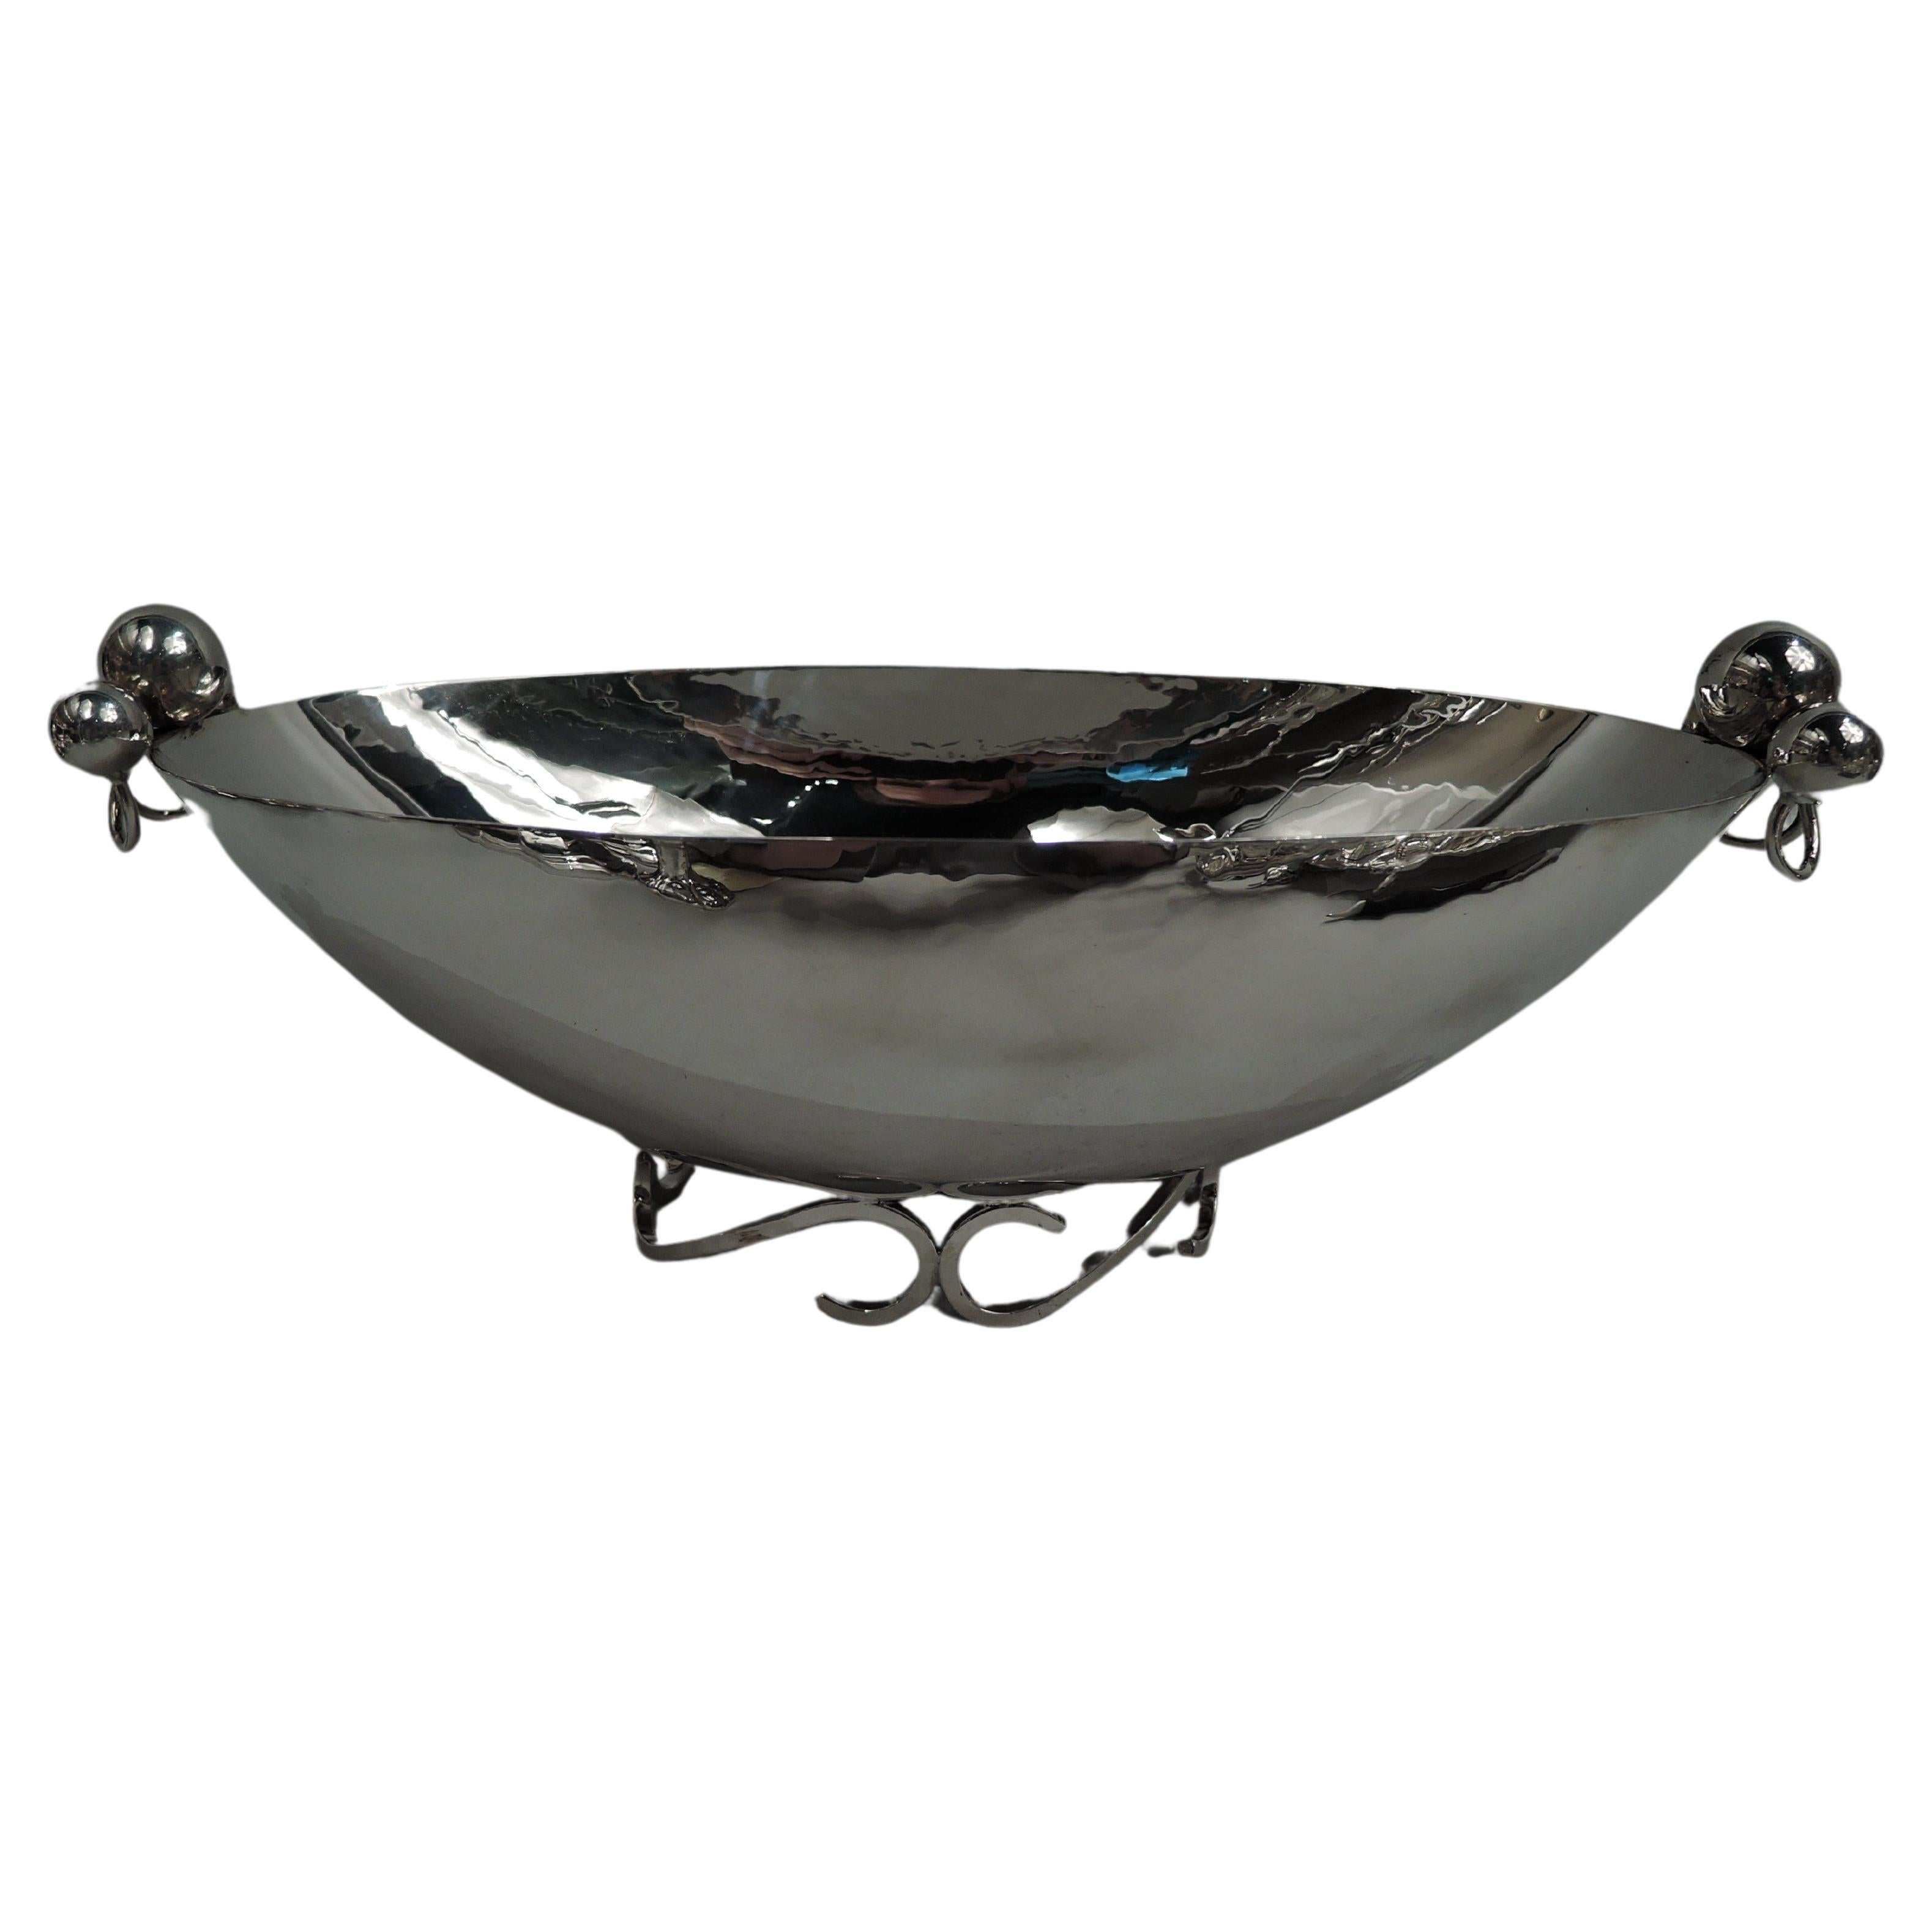 Sciarrotta Midcentury Modern Hand-Hammered Sterling Silver Centerpiece Bowl For Sale